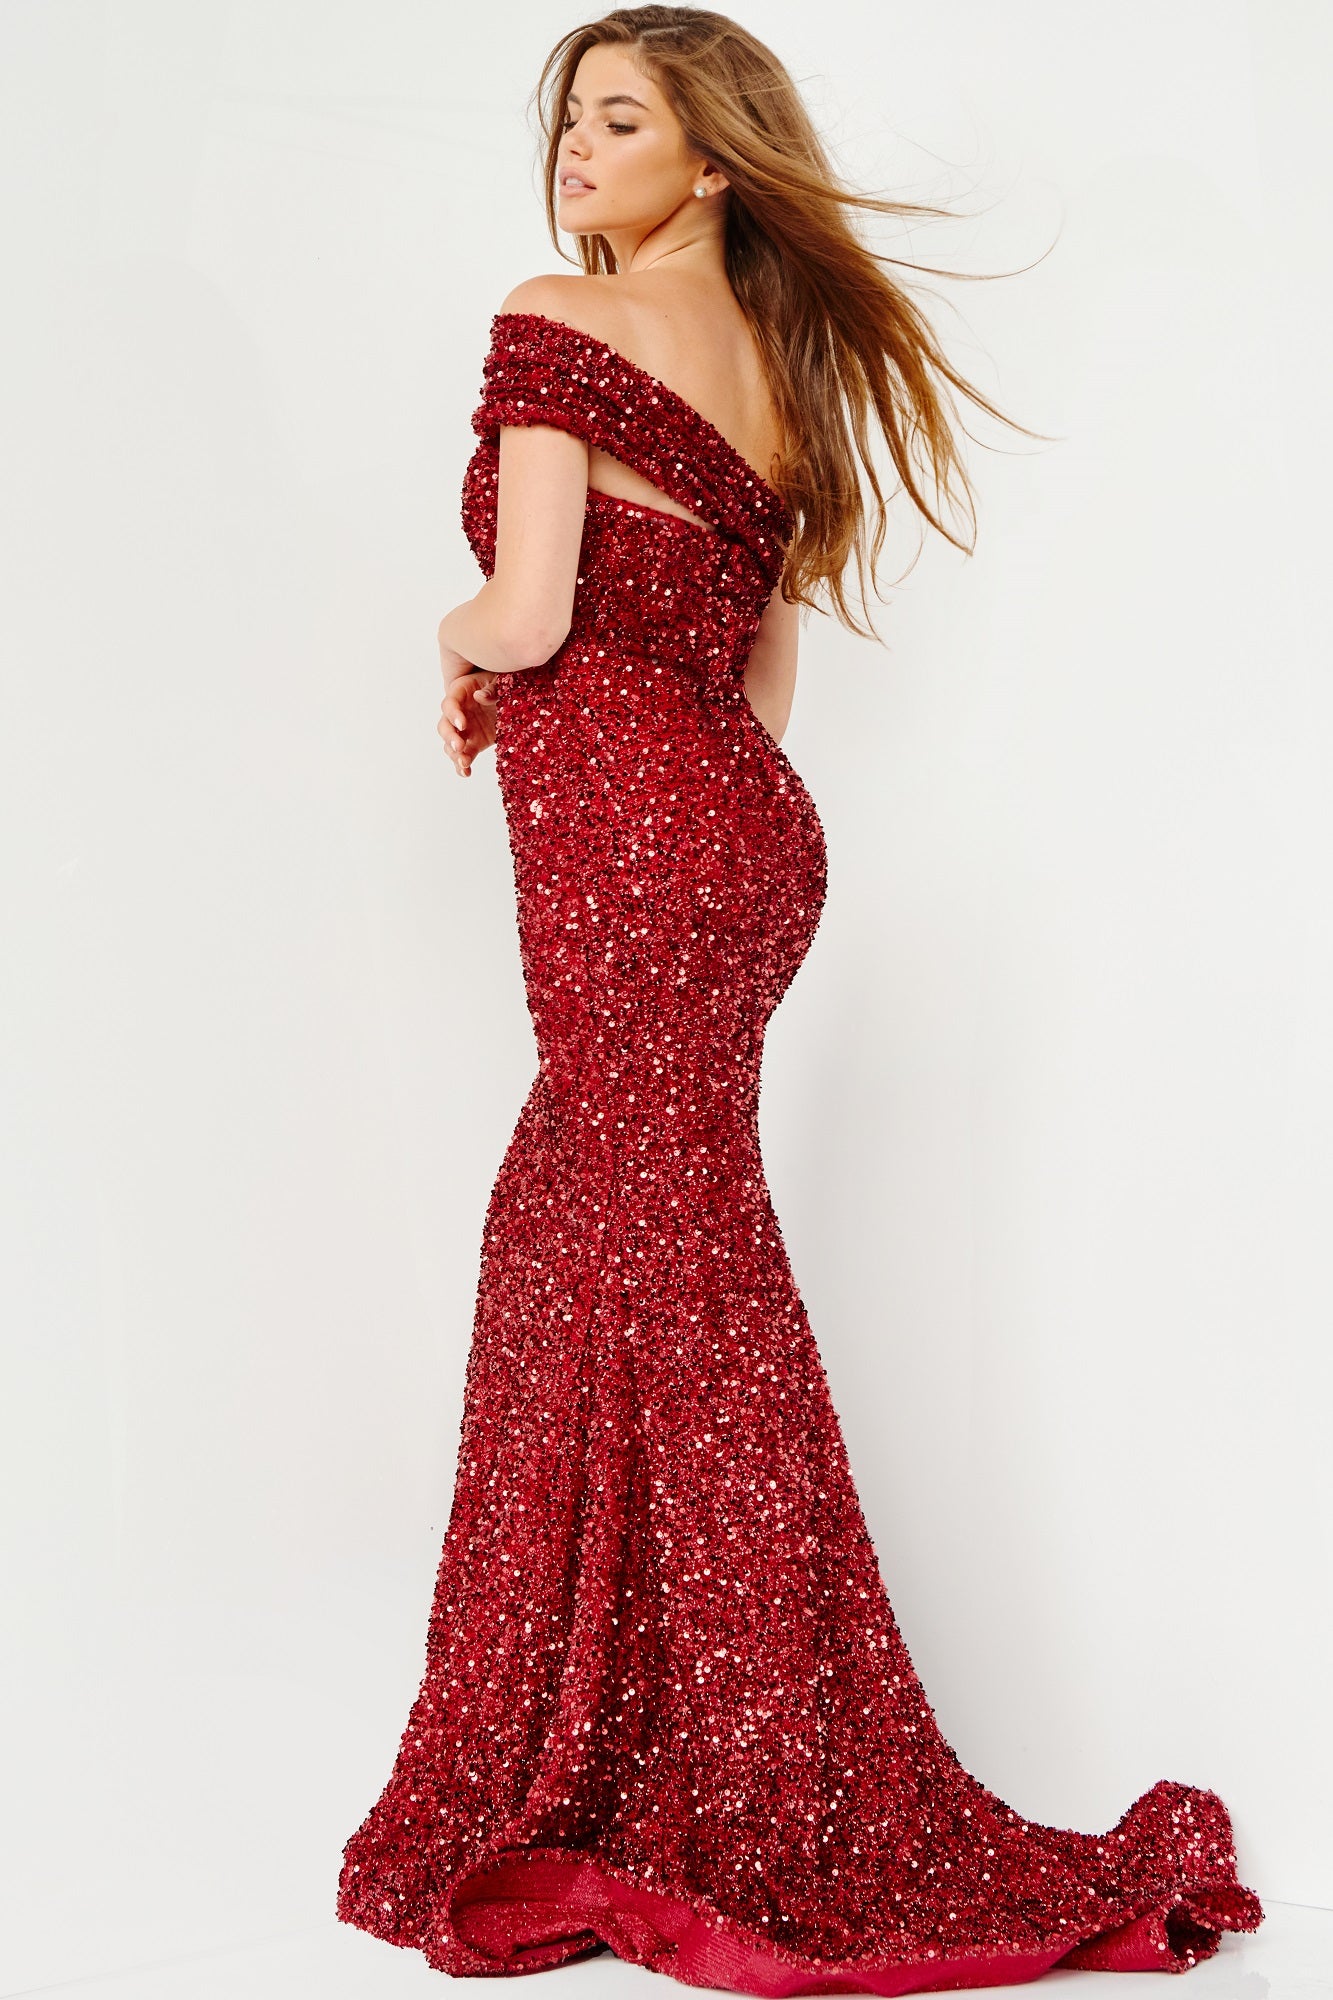 JVN23116 by Jovani features an alluring one-shoulder silhouette, a shimmering sequin exterior and an elegant sweeping train - making it the perfect dress for a prom, pageant or evening event.